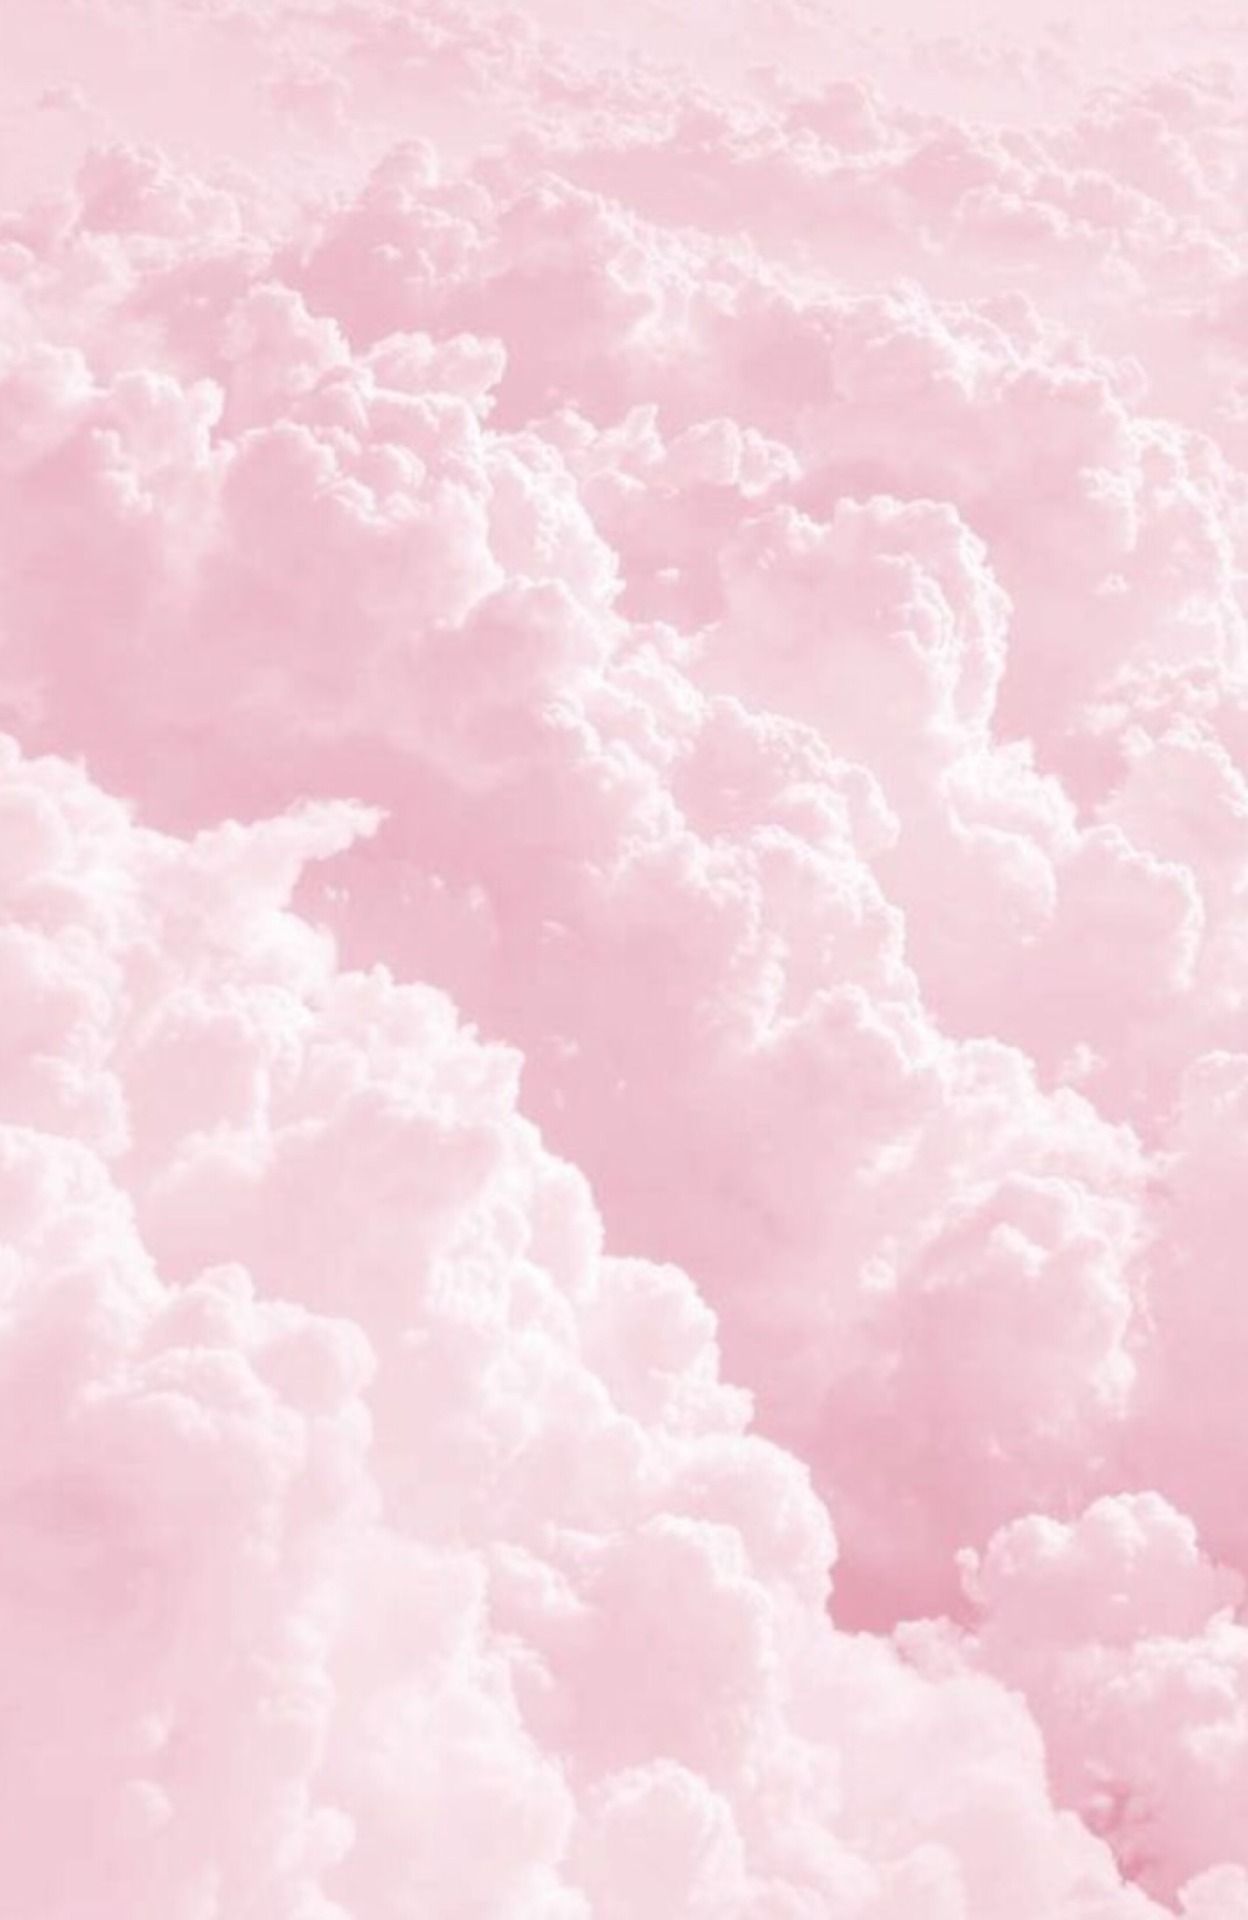 A pink sky with clouds in the background - Cute pink, pastel pink, pink, pink phone, blush, light pink, baby, hot pink, soft pink, cloud, pastel